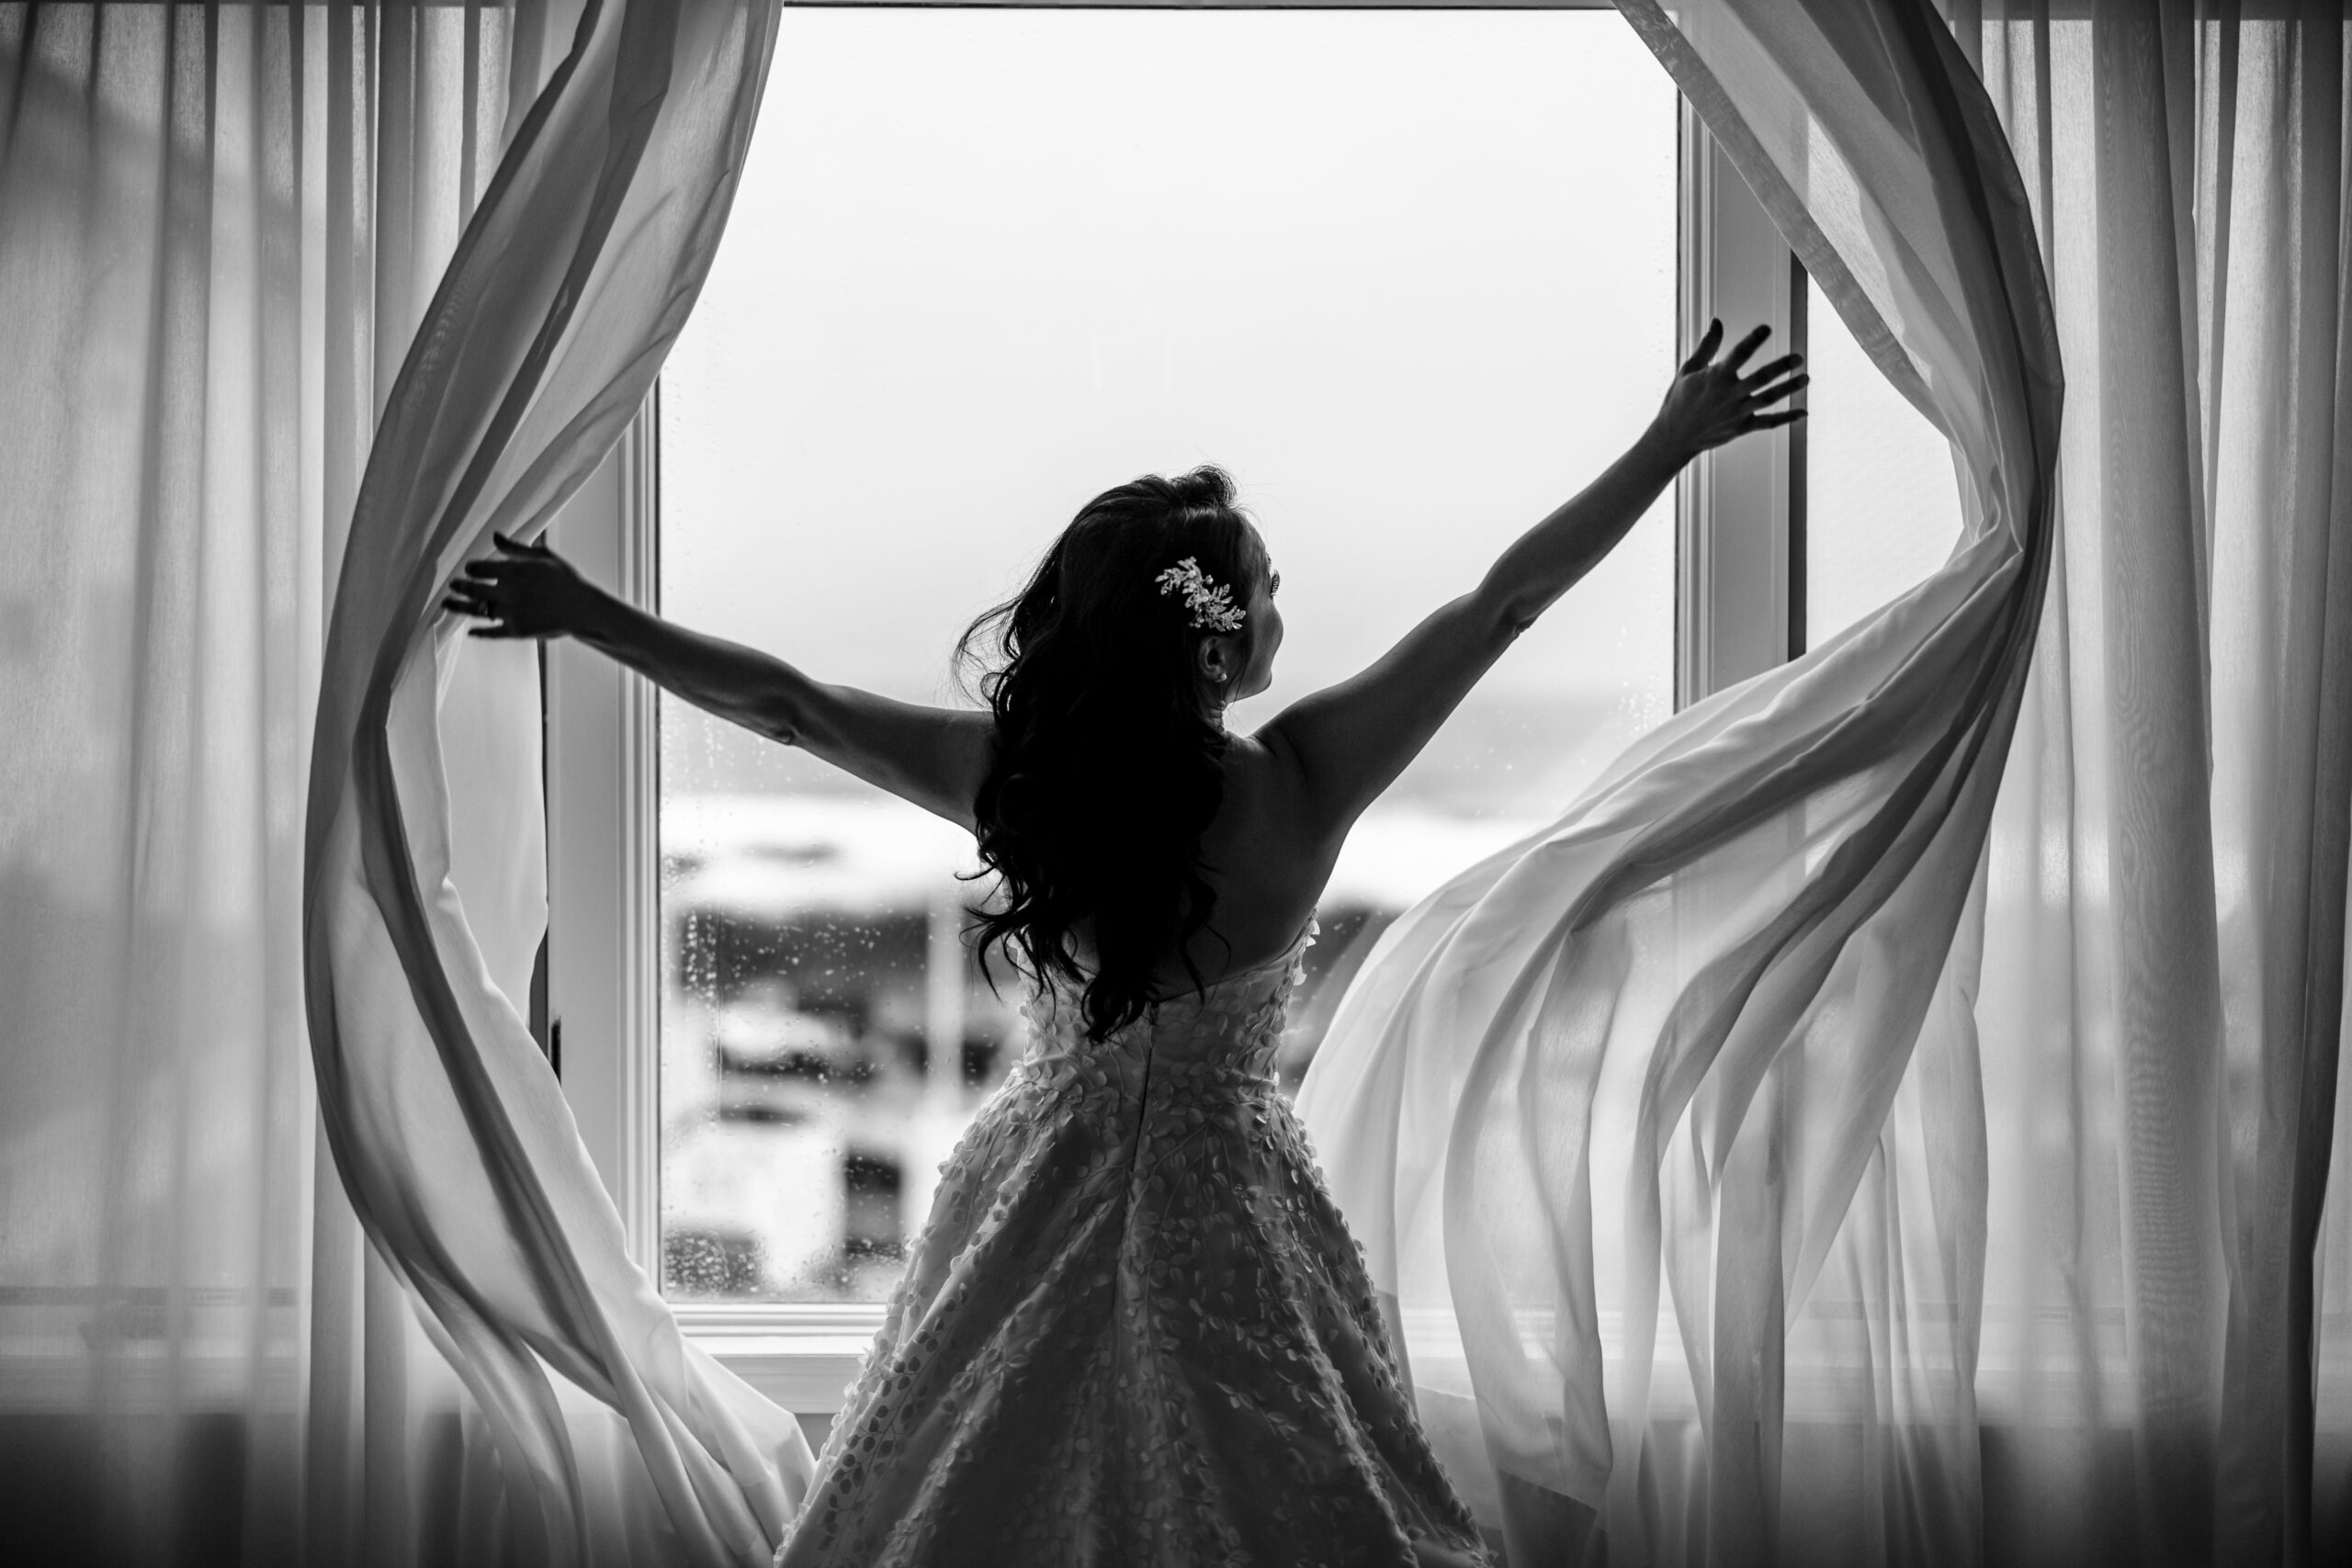 A bride captured by New Jersey Wedding Photographer Jarot Bocanegra with her arms outstretched in front of a window.